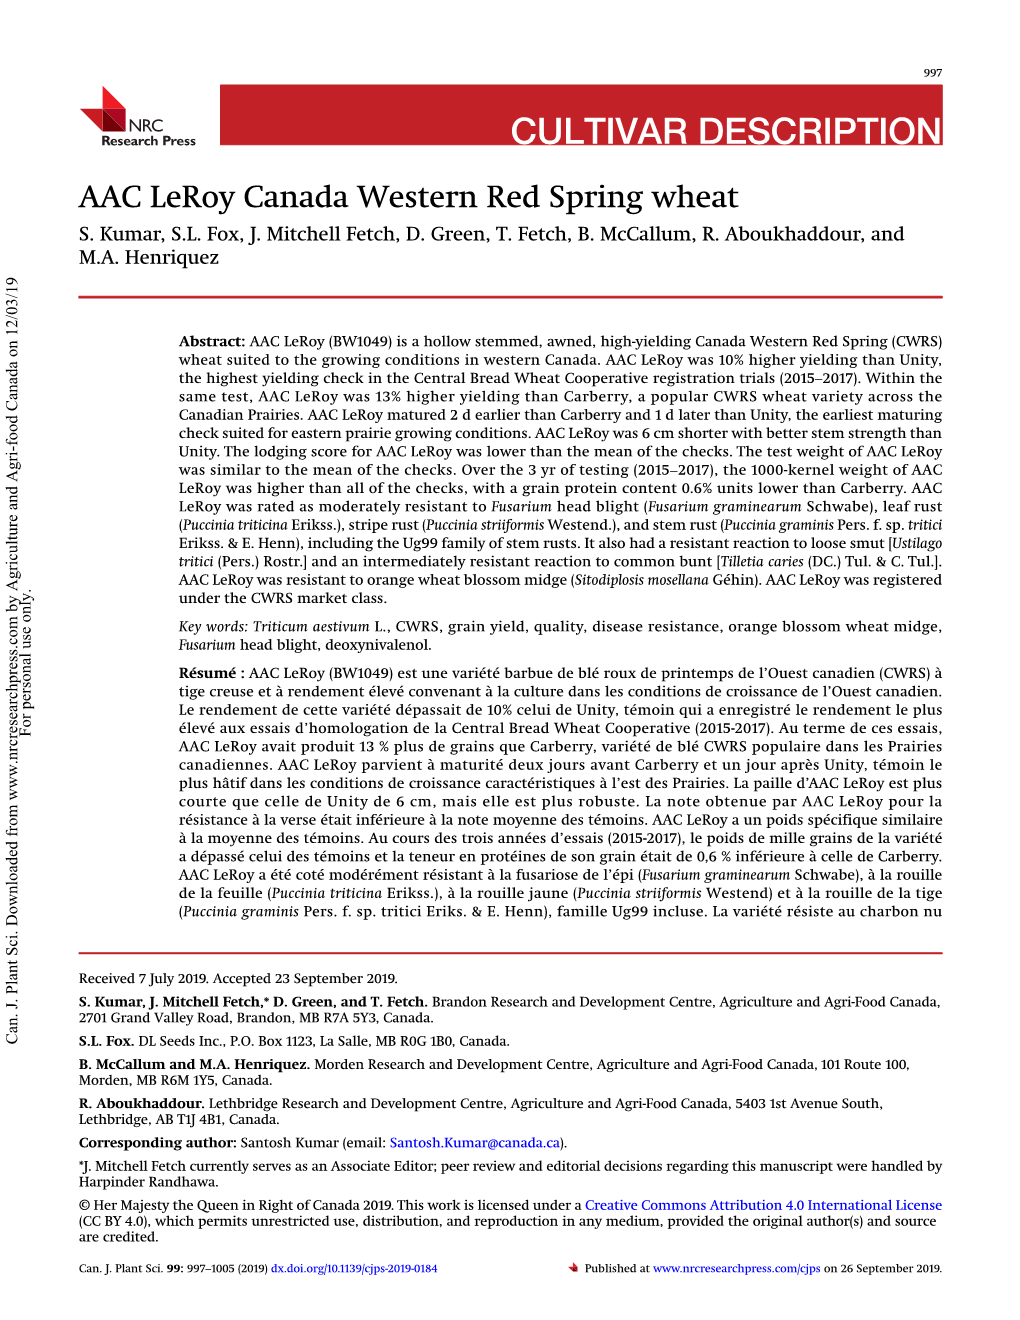 AAC Leroy Canada Western Red Spring Wheat S